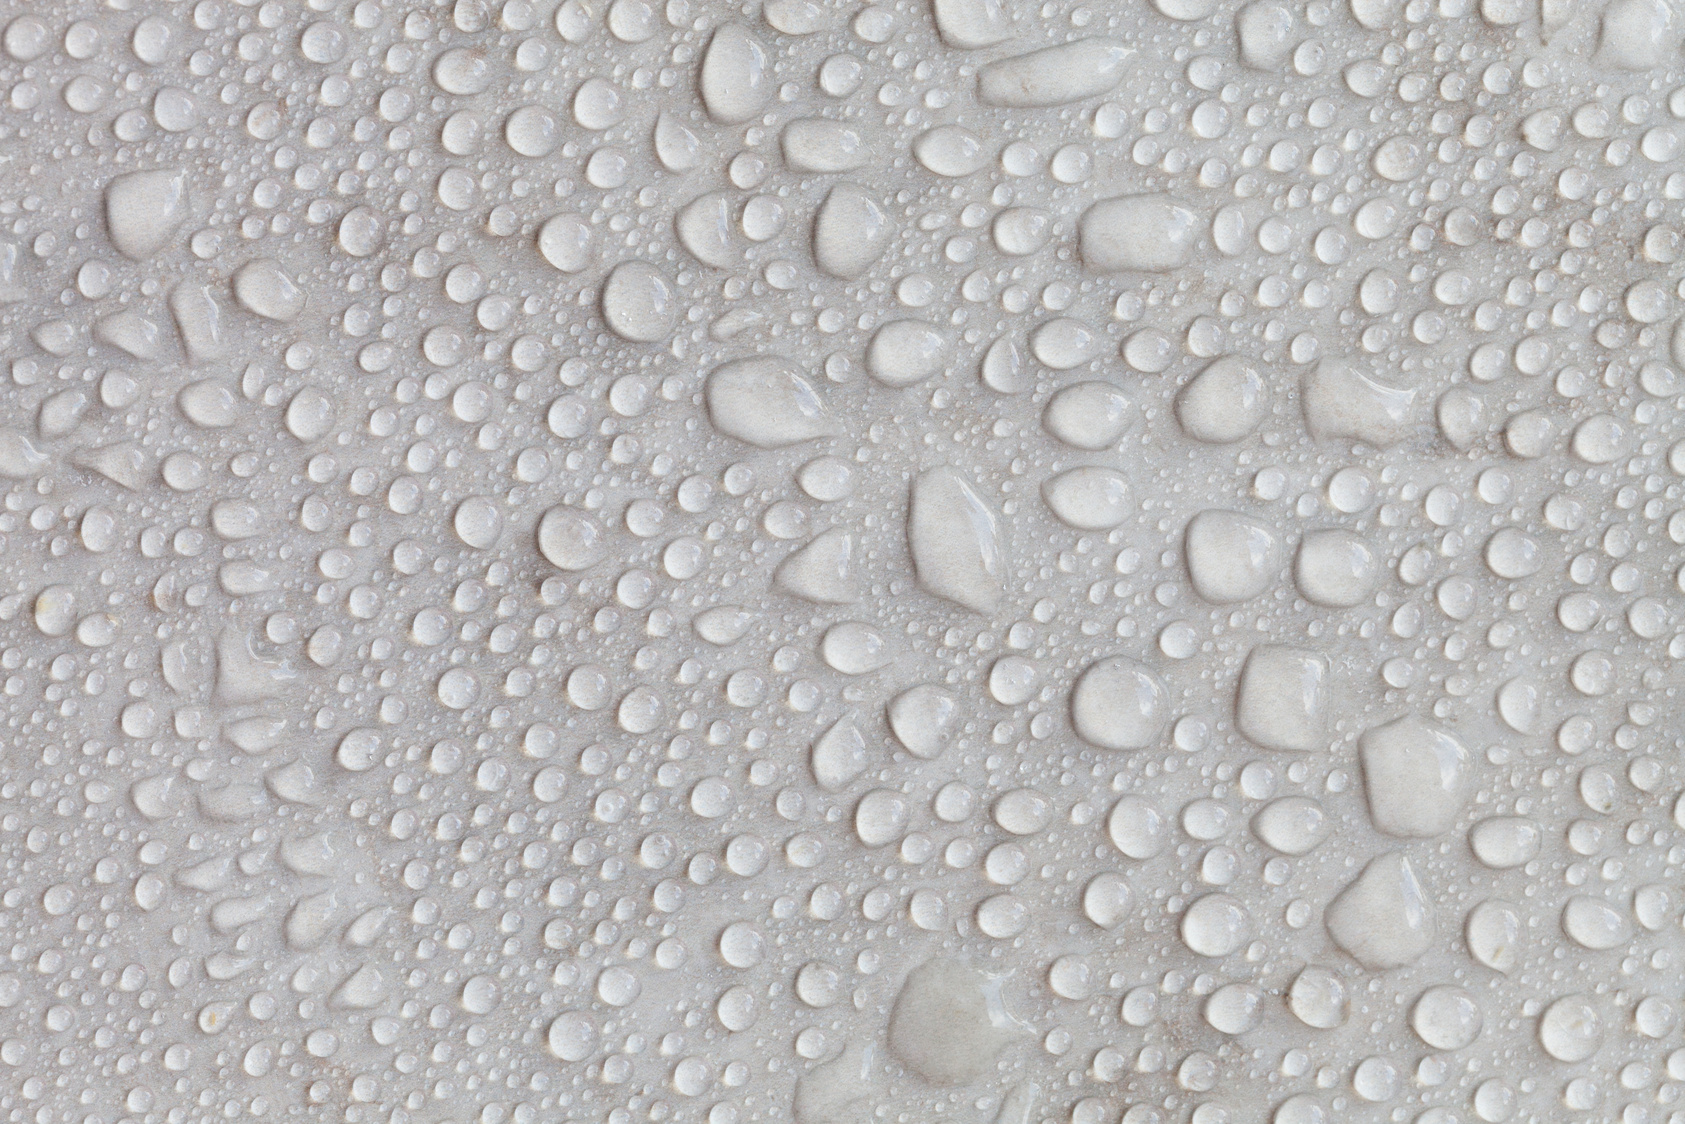 Water droplets on shower tiles